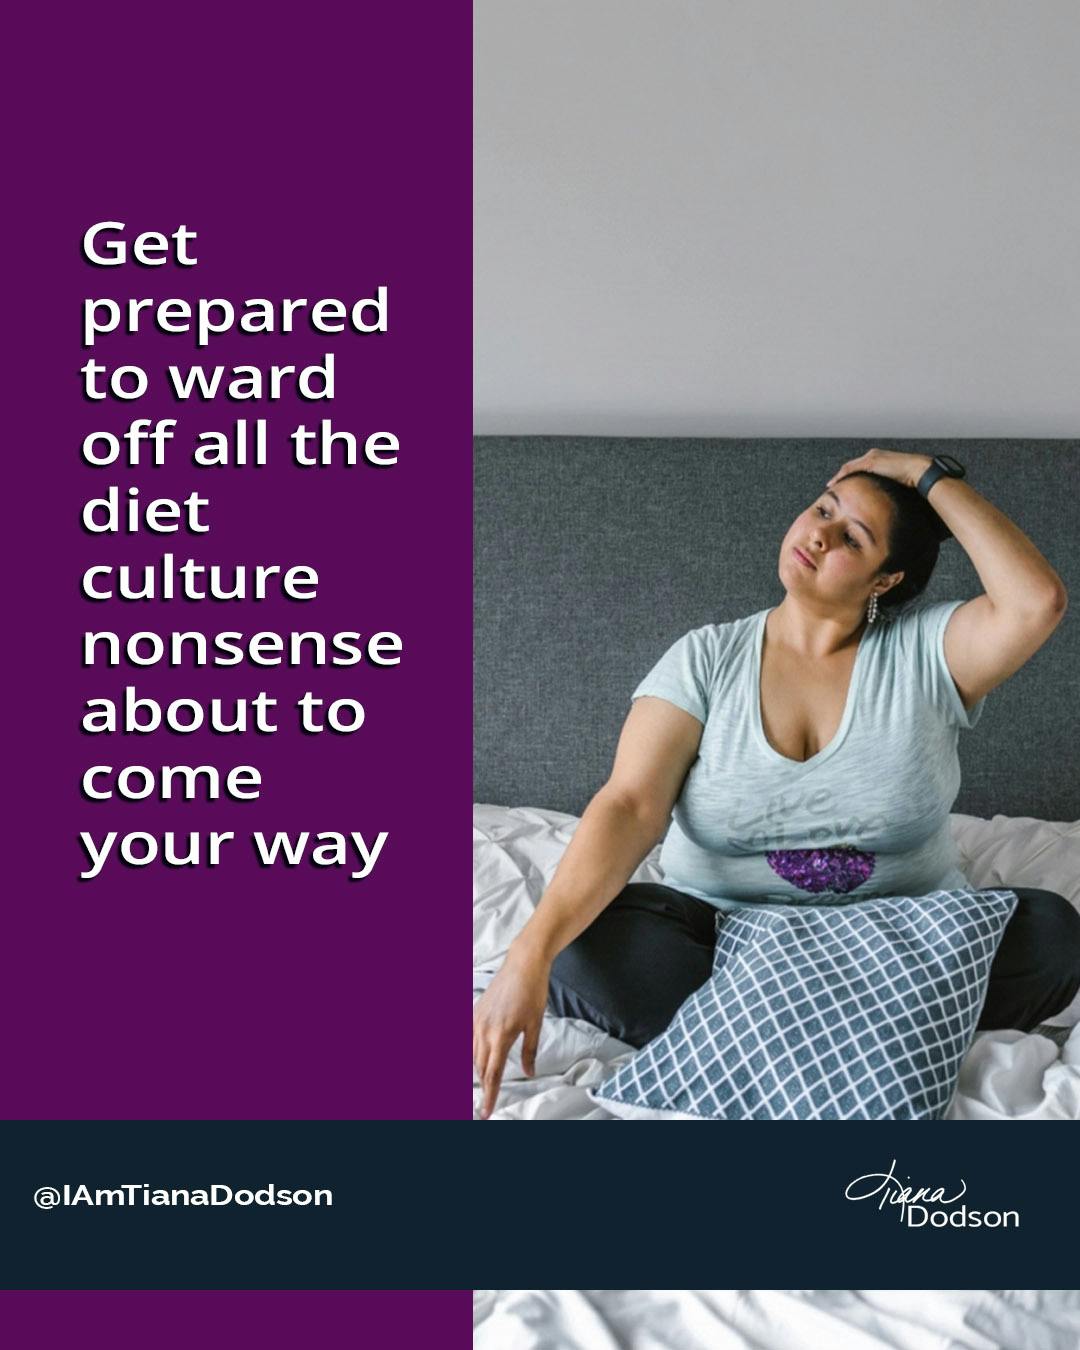 Text reading "get prepared to ward off all the diet culture nonsense about to come your way" to the left of a photo of a fat person sitting on a bed gently stretching their neck